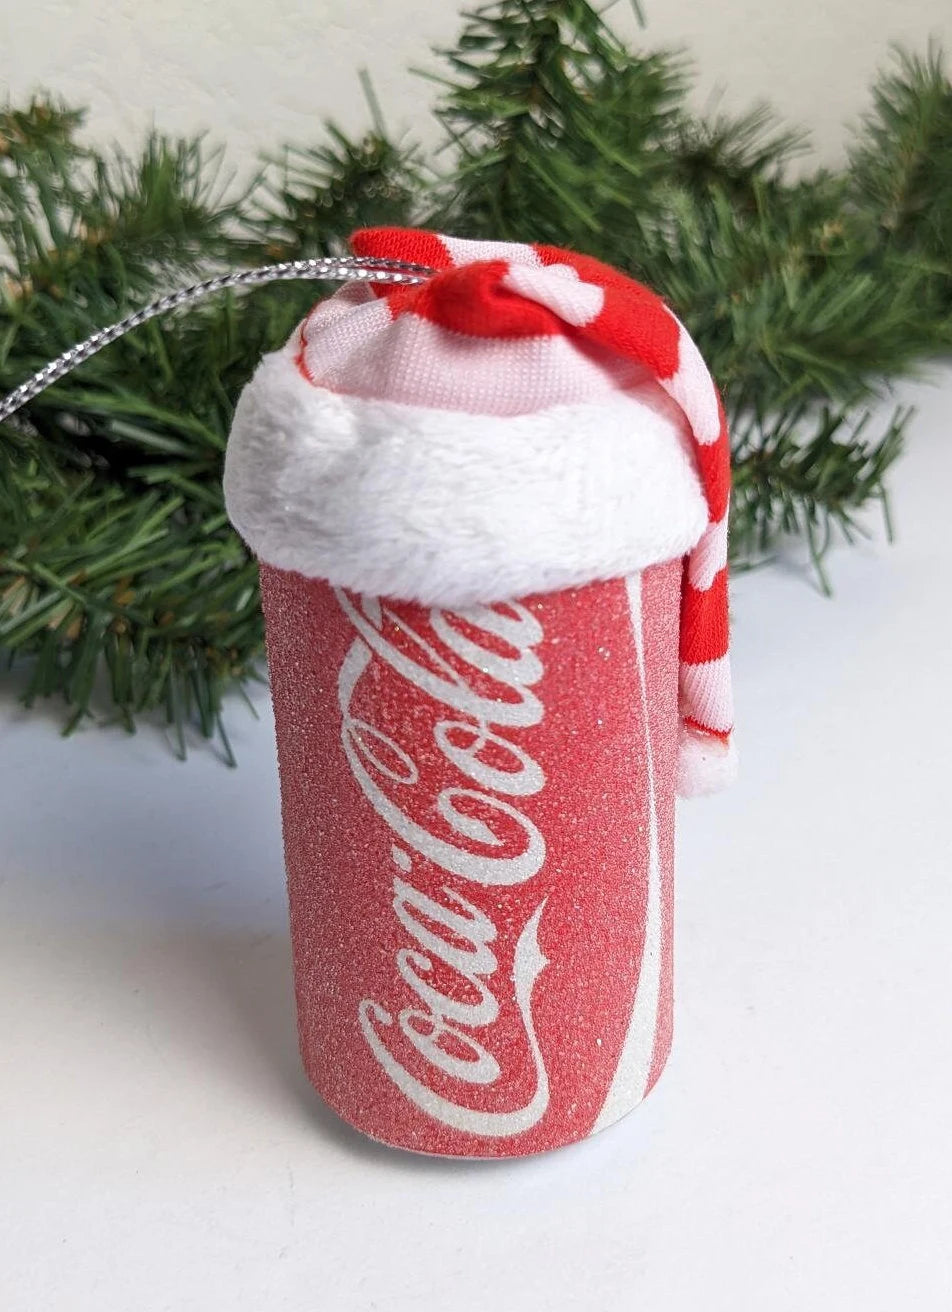 Coca Cola Can with Stocking Cap Christmas Ornament